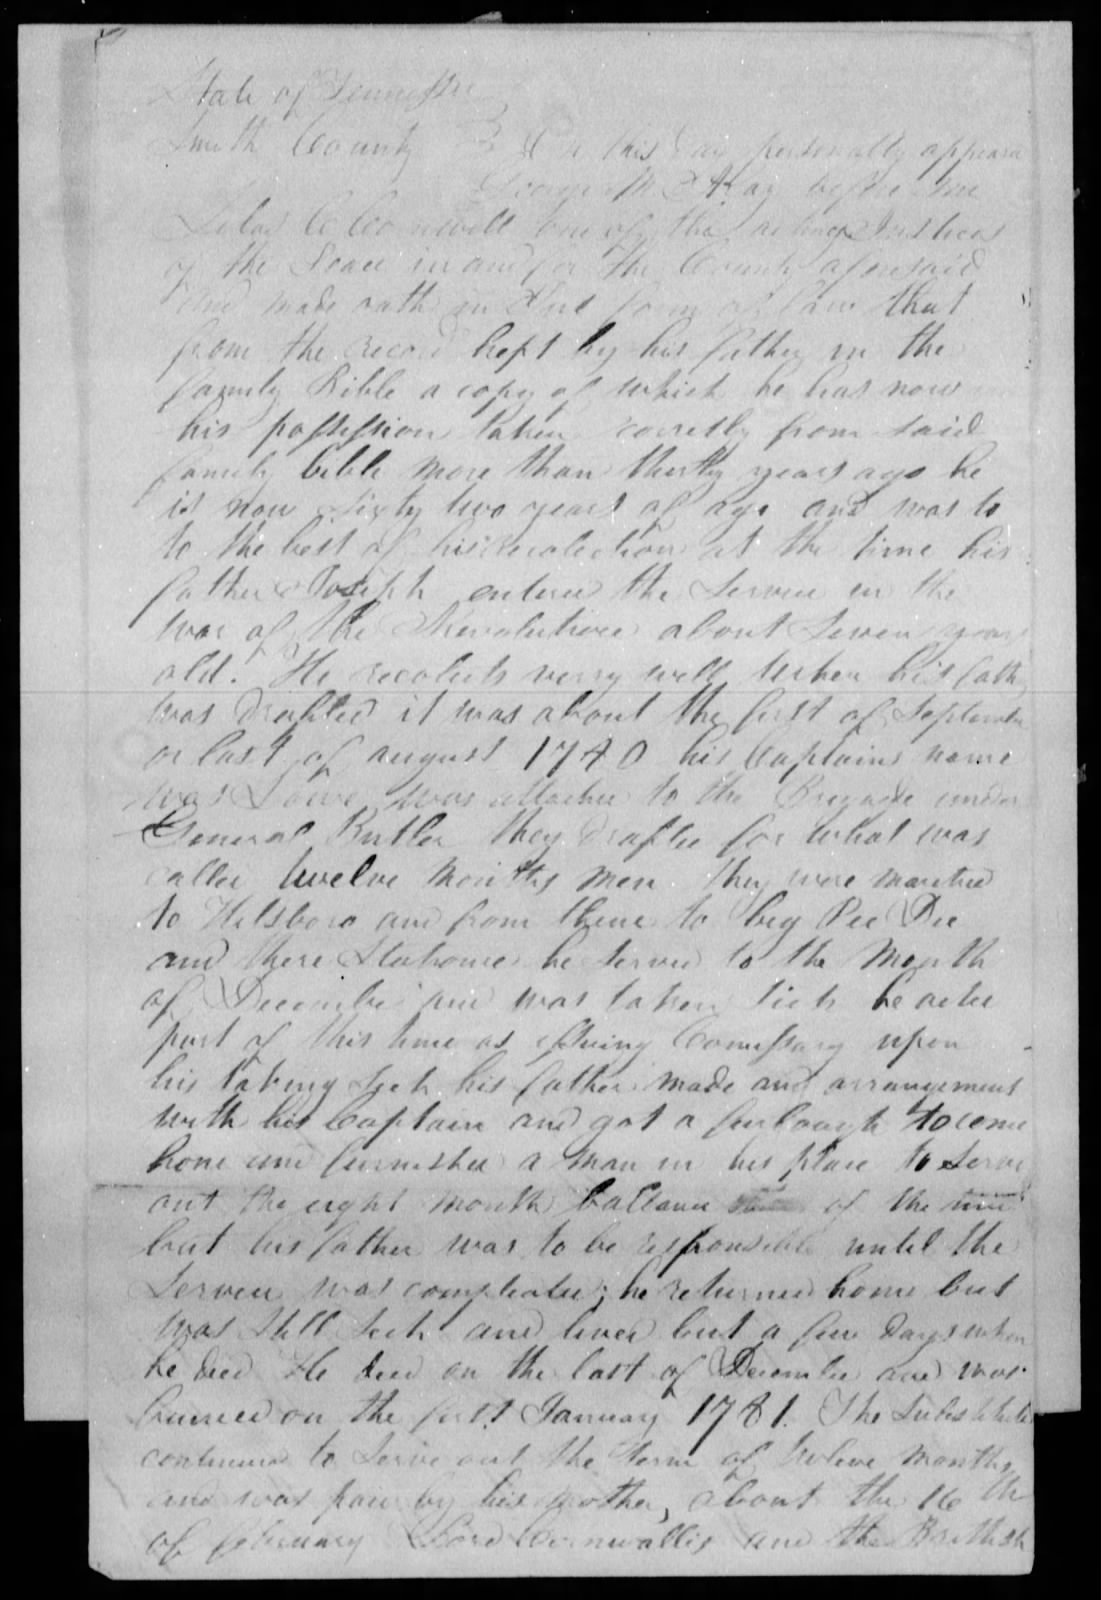 Affidavit of George M. Ray in support of a Pension Claim for Lydia Ray, circa 11 September 1837, page 1